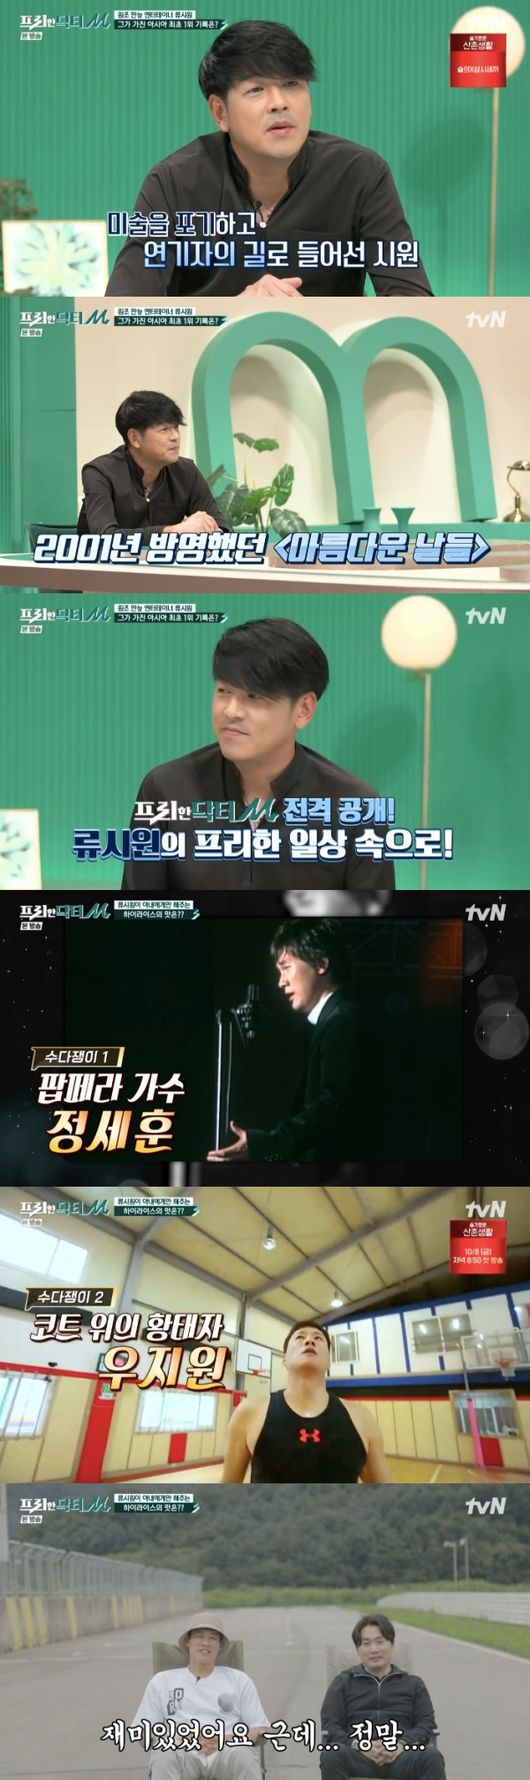 Actor Ryu Si-won revealed his current situation in Free Dr. M.Ryu Si-won appeared as a guest in the TVN entertainment program Free Dr. M broadcasted on the morning of the 4th.Ryu Si-won has been on the air for a long Sigi. Ryu Si-won has revealed his current status by enjoying Camping with his favorite popper singer Jung Se-hoon and basketball player Woo Ji-won.Three are close. Woo Ji-won met because of Yoon Jung-soo when I was in the middle of my career, and I became close to him so far.I had a hard Sigi and I interviewed him at that Sigi, but he said that his heart was healing with Jeong Se-hoons song. He heard it and gave it directly through SNS, so I became Friendly because I was also in a difficult Sigi.Most recently, when I met a good person and married, Jung Se-hoon gave me a celebration. As Ryu Si-won, who likes racing, he invited his Friends to the racing Trackss to run a sports car.He lightly offered 220 ~ 230 taxi Sigi, and he showed off his driving skills with a brilliant drift.I will do it only for Wife, but I will do it because two people have come here. In addition to the barbecue, I made a Camping atmosphere on the racing Trackss by making the grilled salt and high rice.After enjoying the food to be called, Woo Ji-won told Ryu Si-won, I have seen my face for more than 20 years and I like my face most.Ryu Si-won said, I have never been personally rested.If this is my relationship, I will do it anySigi tomorrow or a year later, and if I feel like my relationship is here, I can not do it. He also said, I was naturally focused on Japan because it was difficult to carry out Korean and Japanese activities. I had some news that I was having difficulty in such a situation.Through that period, I went to the point of devolution a lot.Now I have no impatience to do too much and I am comfortable with my mind.  If there is a work that can fit well with me, I am ready at any Sigi. I like entertainment. TVN.